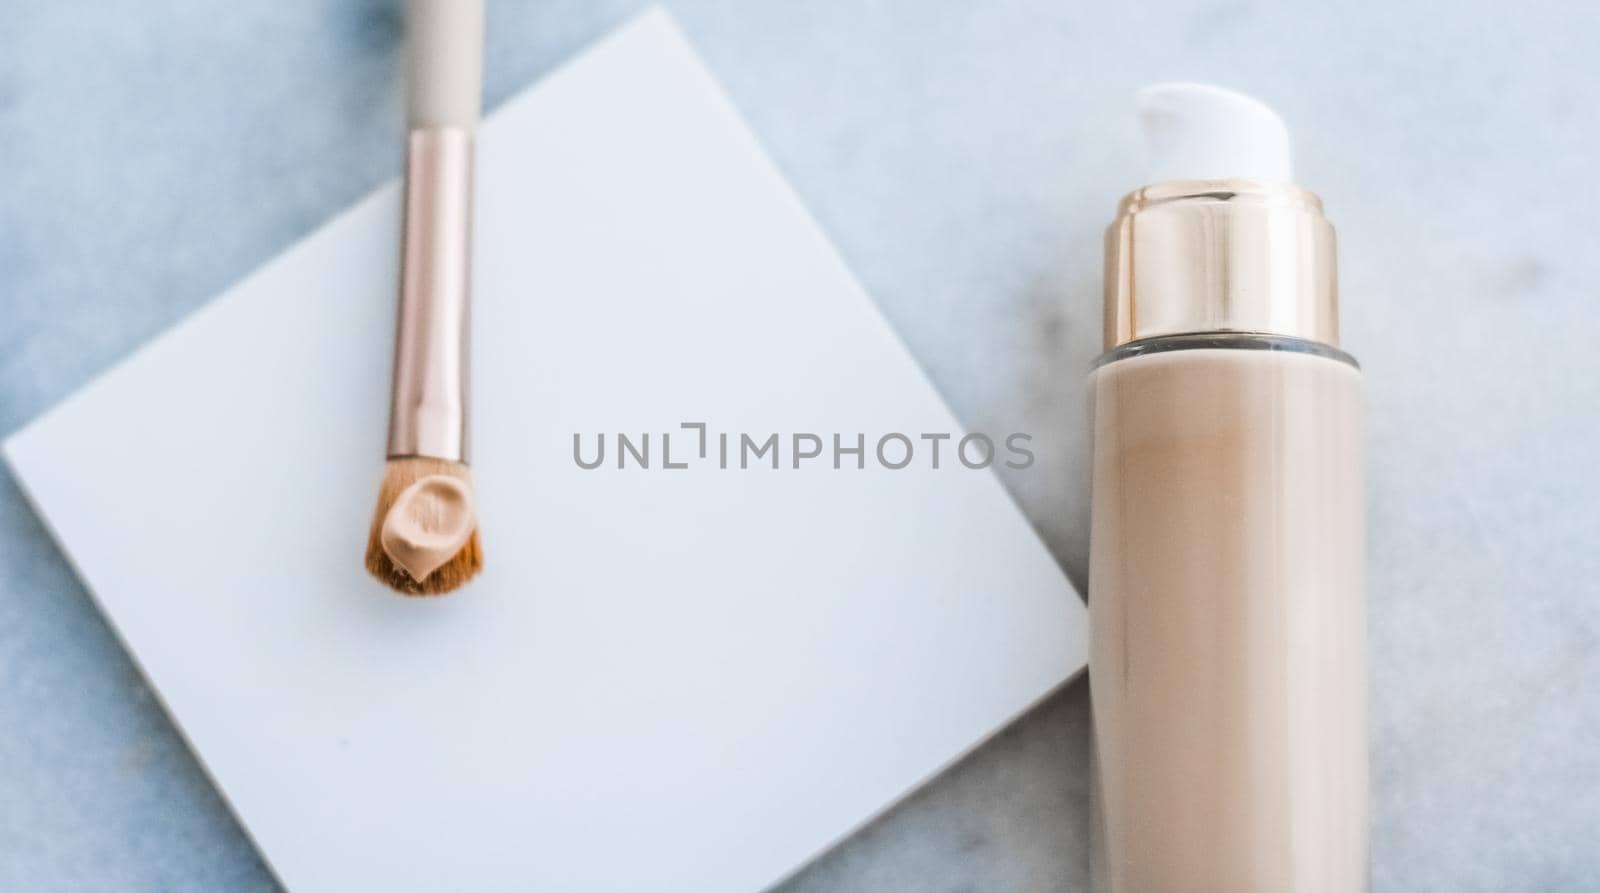 Cosmetic branding, glamour and skincare concept - Makeup foundation bottle and contouring brush on marble, make-up concealer bb cream as cosmetics product for luxury beauty brand holiday design